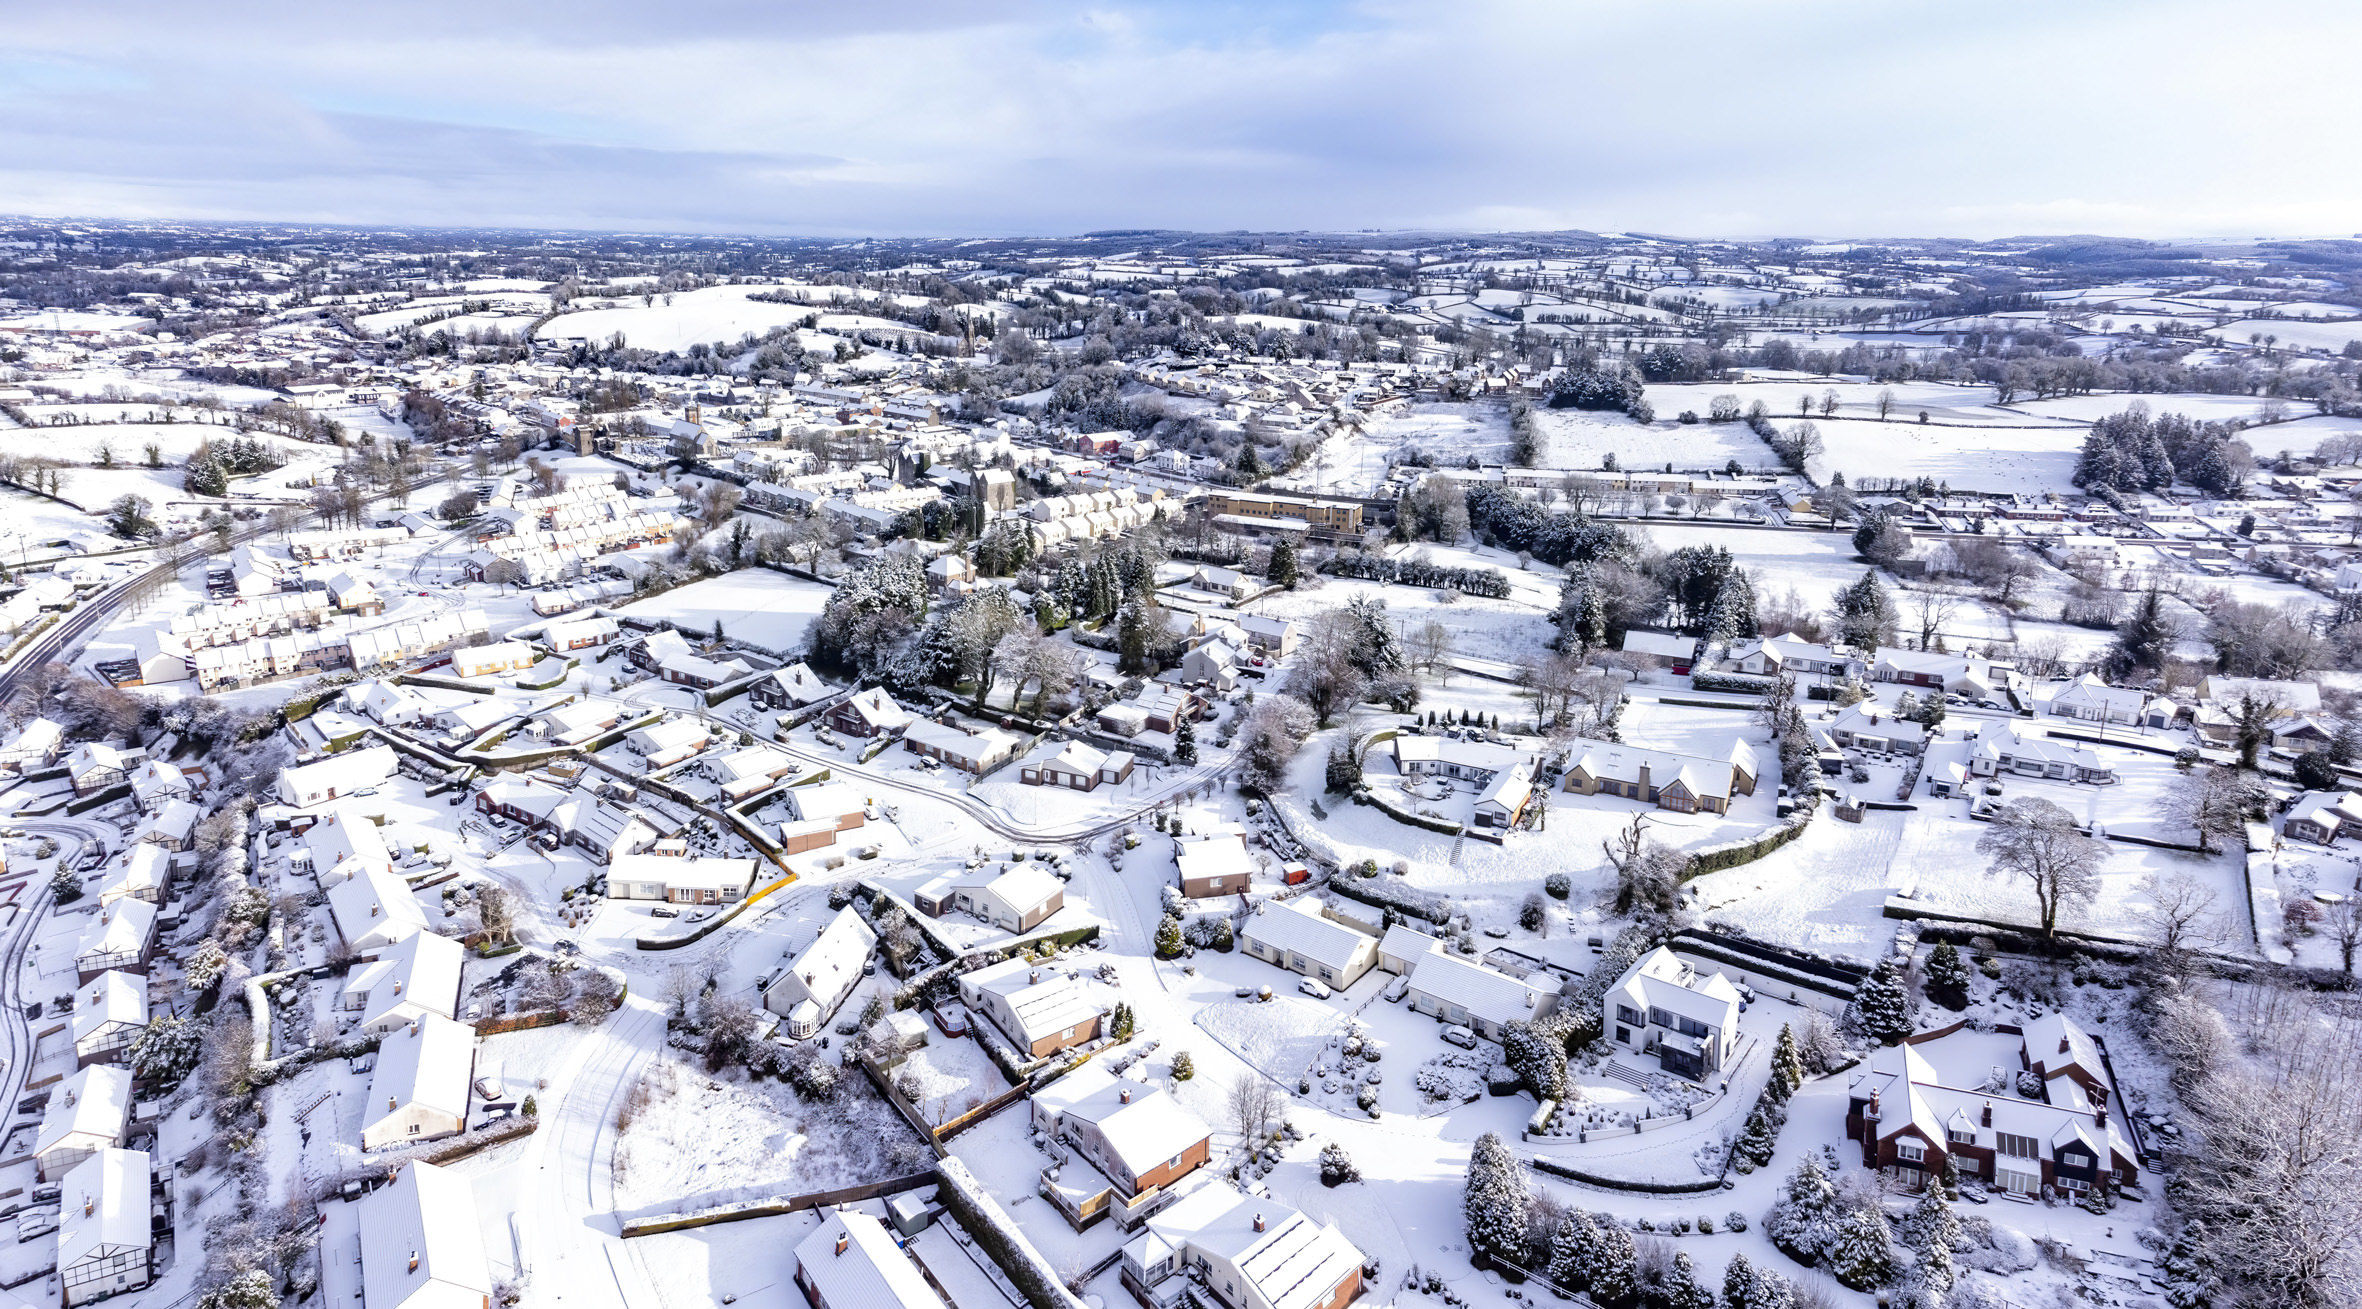 The town of Lisnaskea blanketed in snow.